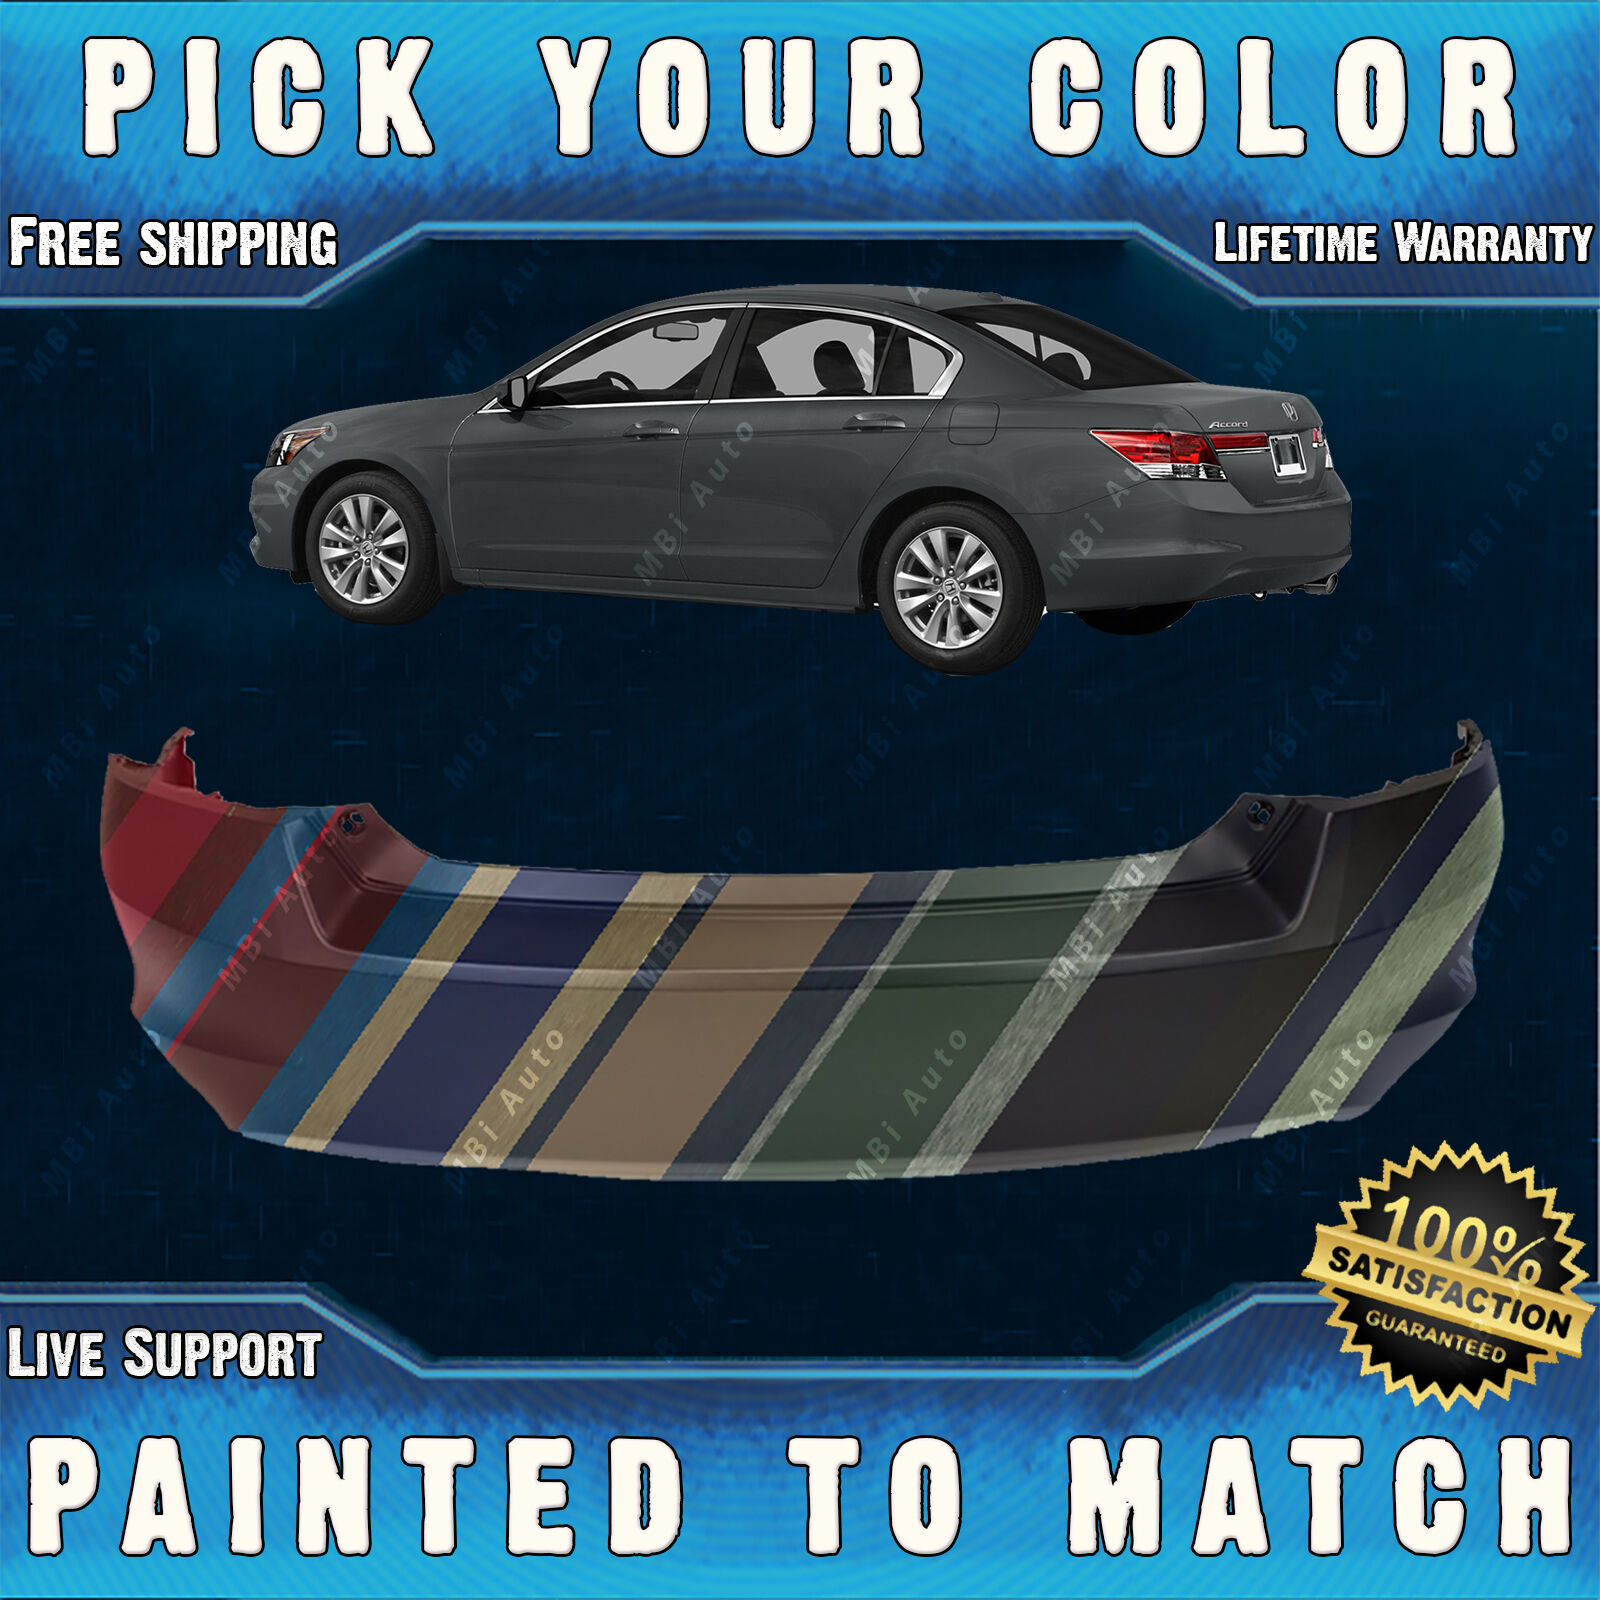 NEW Painted To Match - Rear Bumper Cover For 2008-2012 Honda Accord Sedan 4 Door